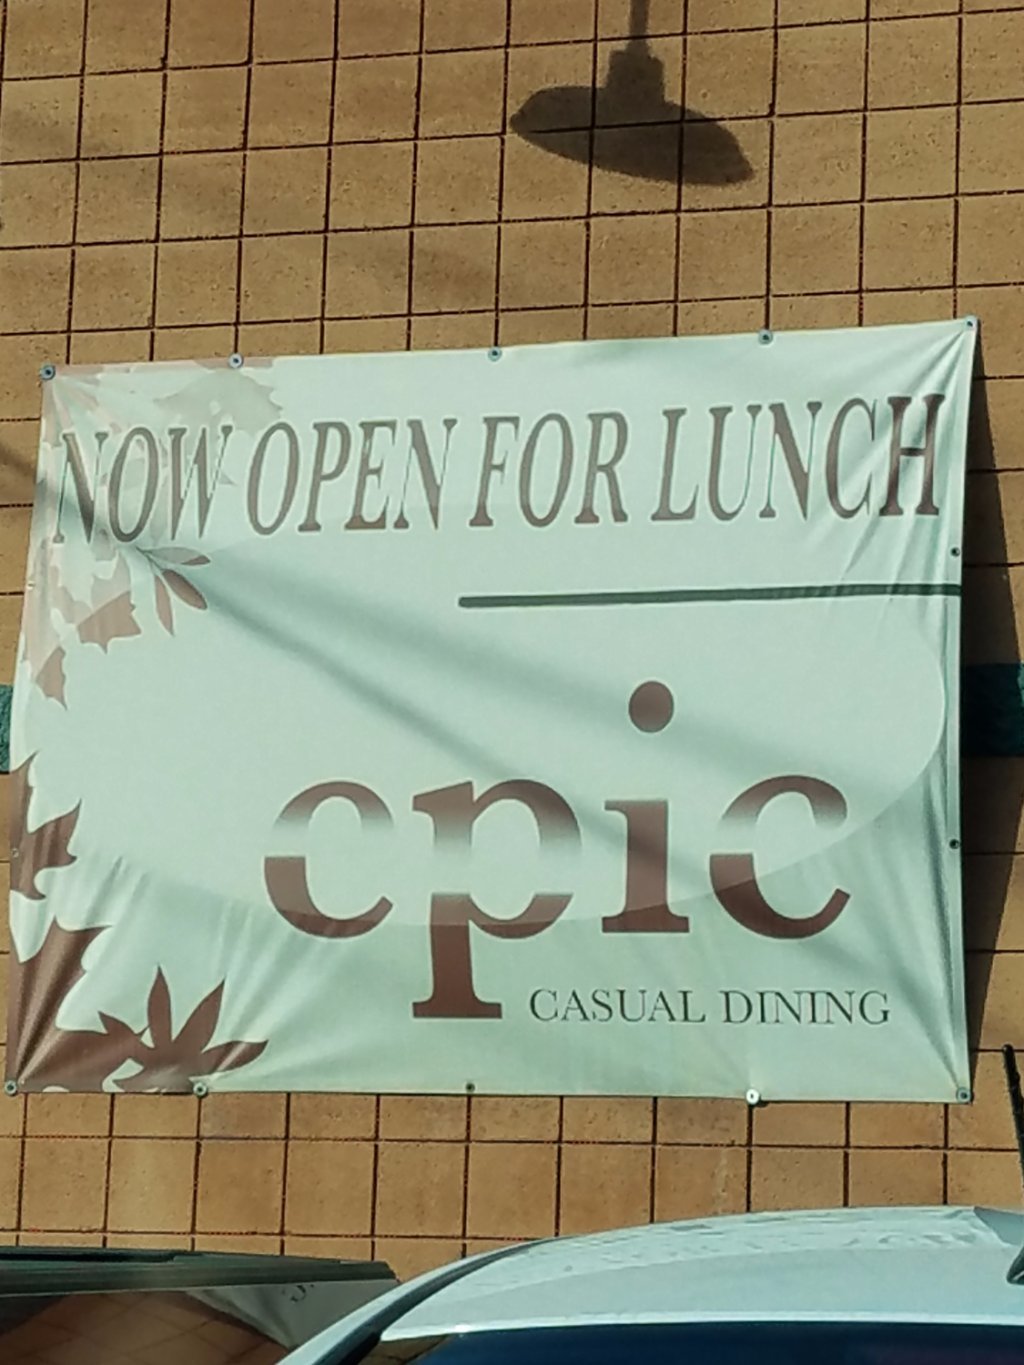 Epic Casual Dining